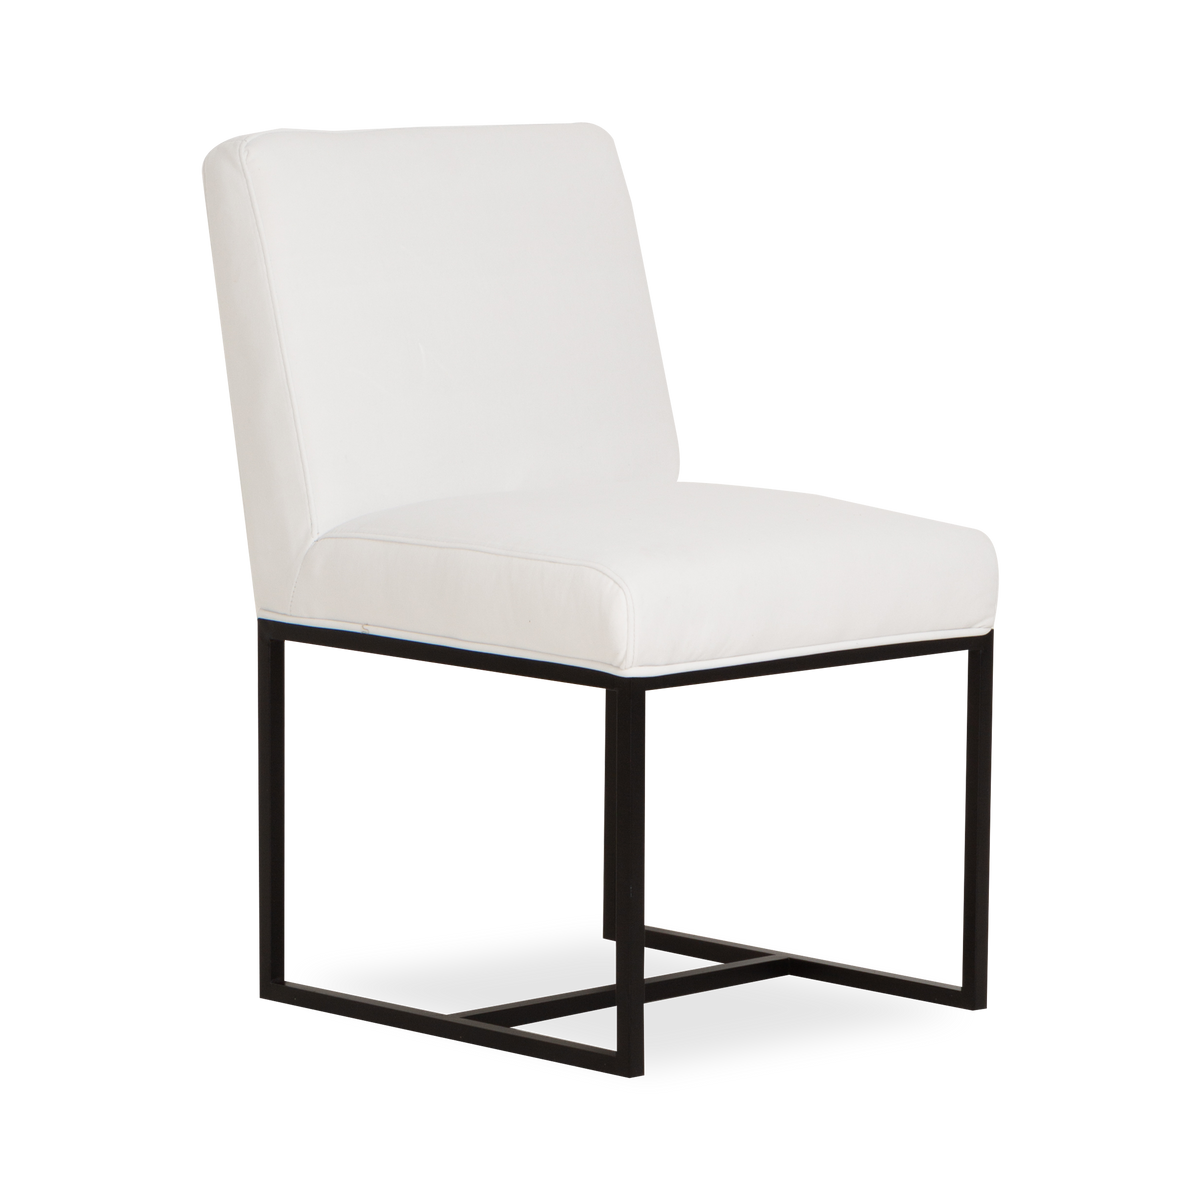 A contemporary classic, the Iris Side Chair offers a tailored look.